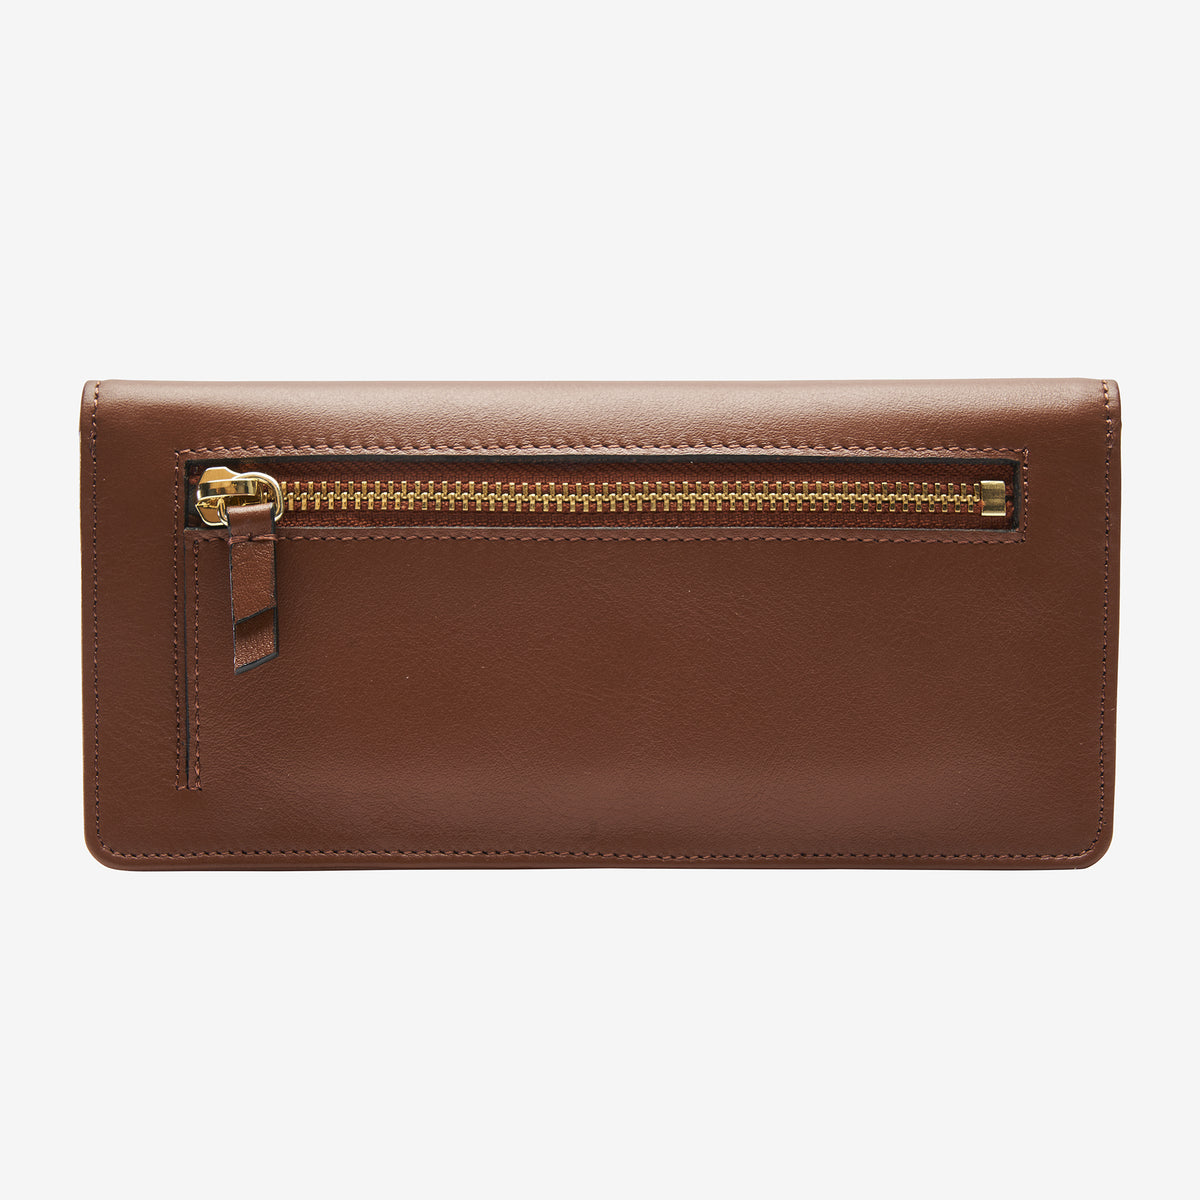 tusk-434-leather-clutch-wallet-wood-back